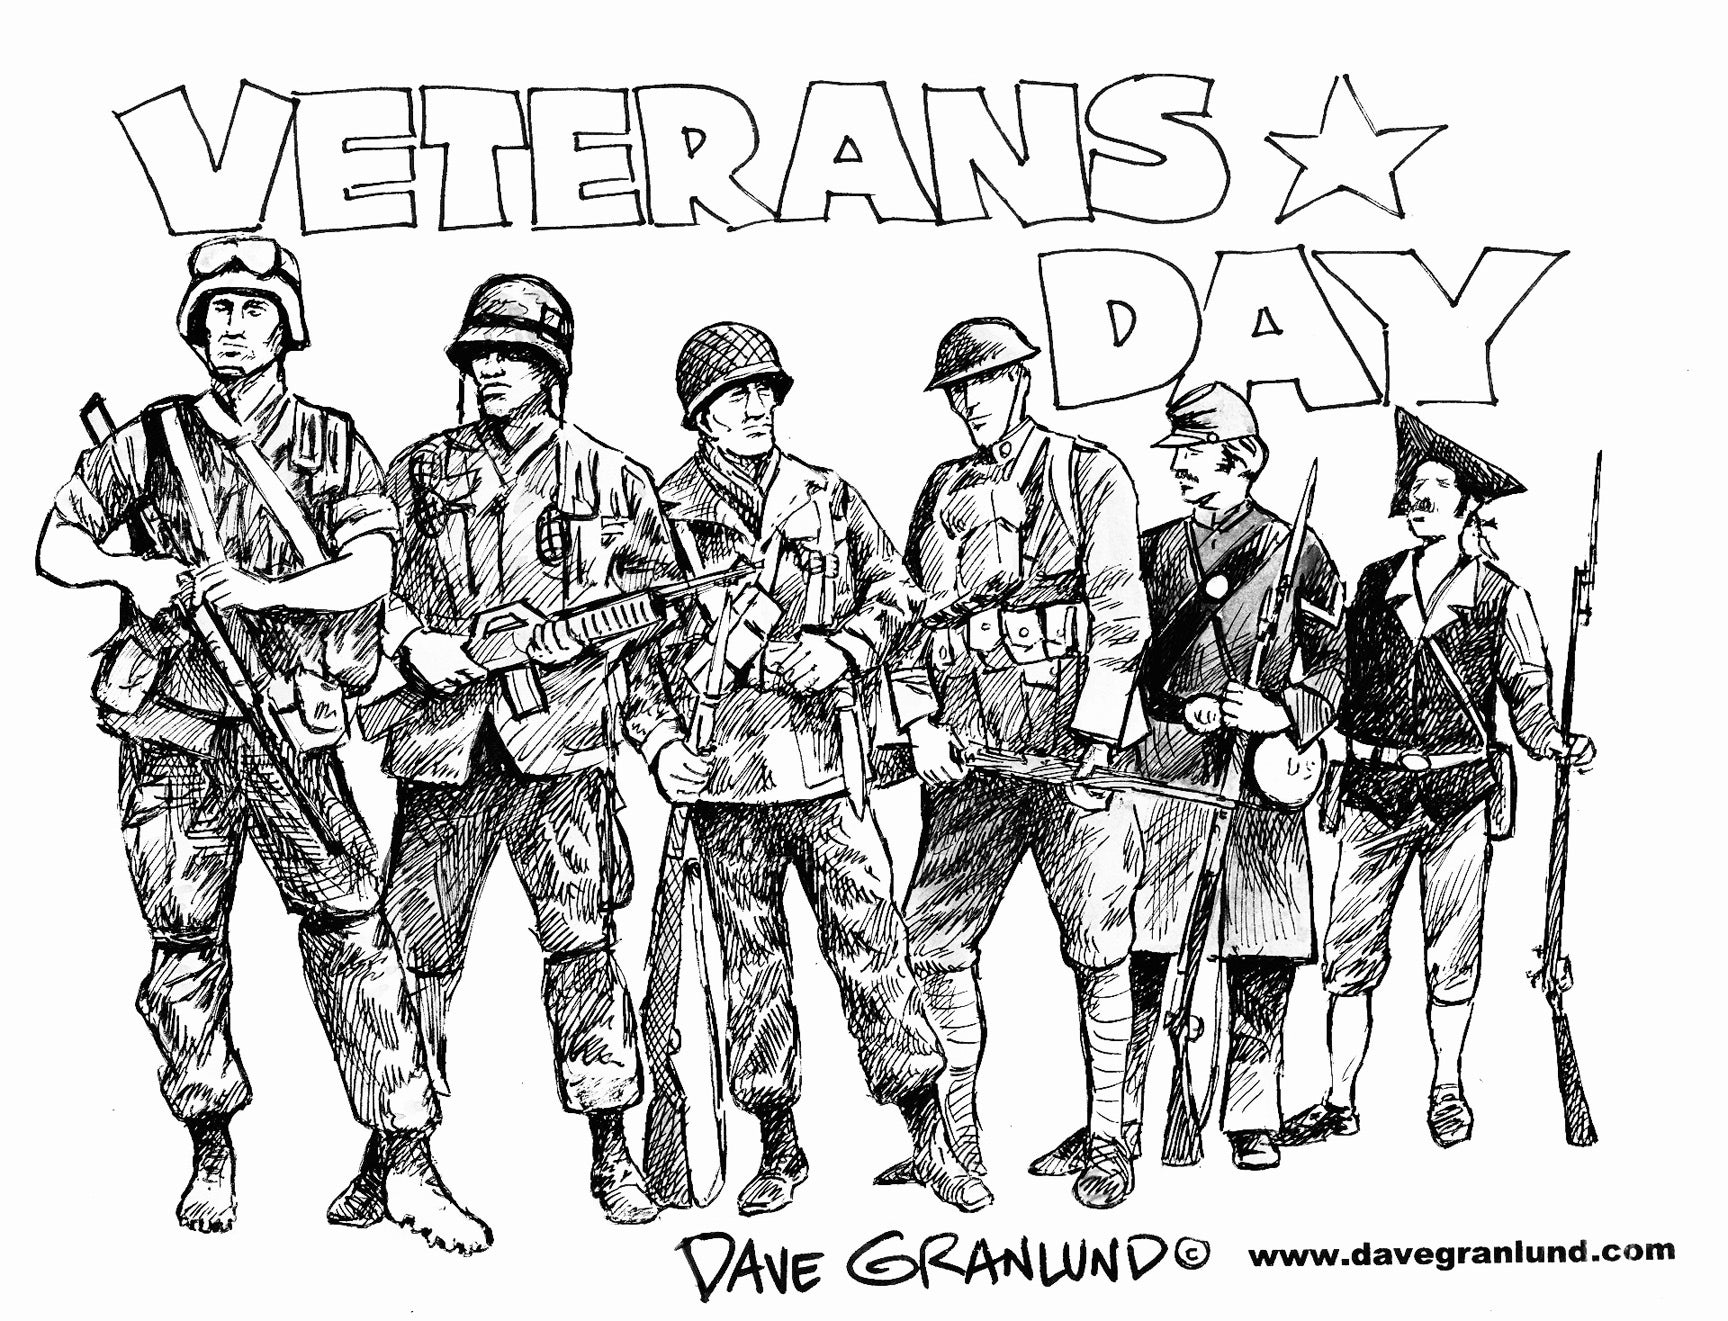 A history of Veterans Day in the United States - Daily Leader | Daily Leader